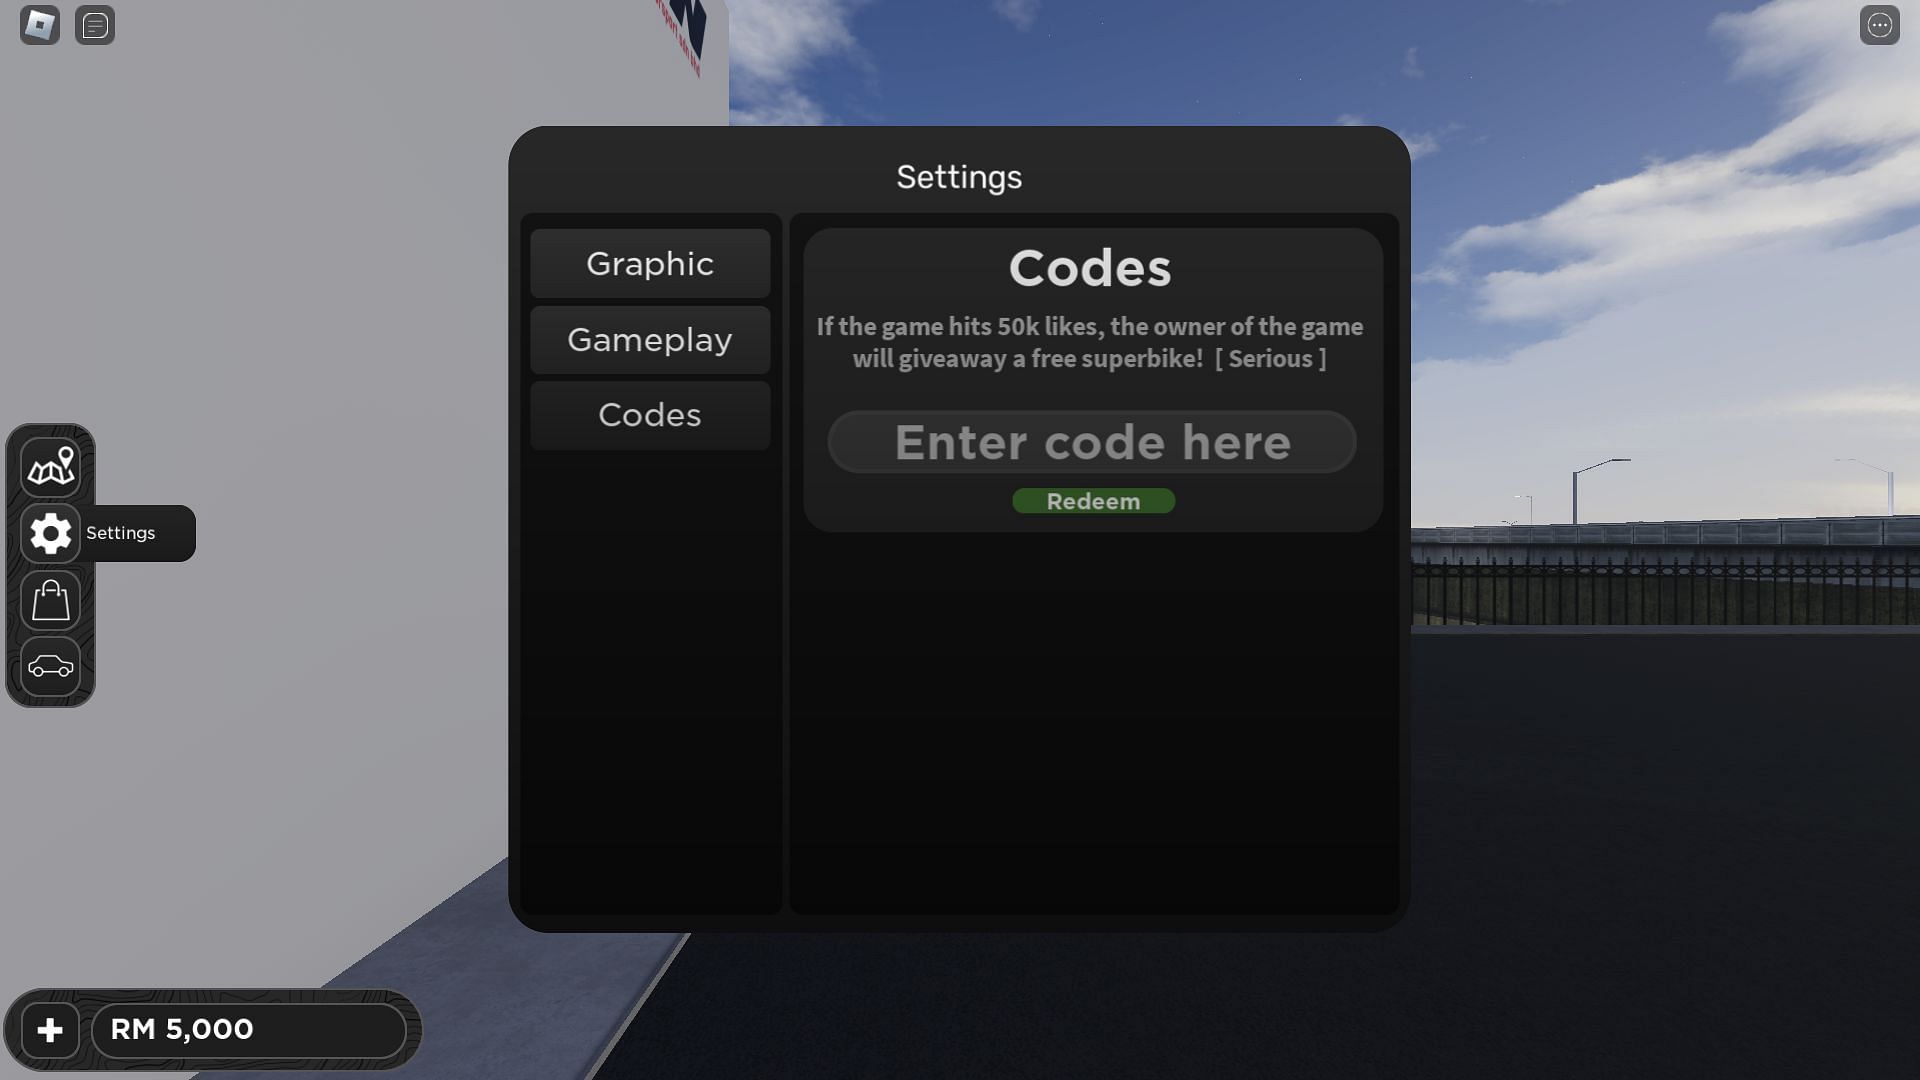 Active codes for The Ride (Image via Roblox)